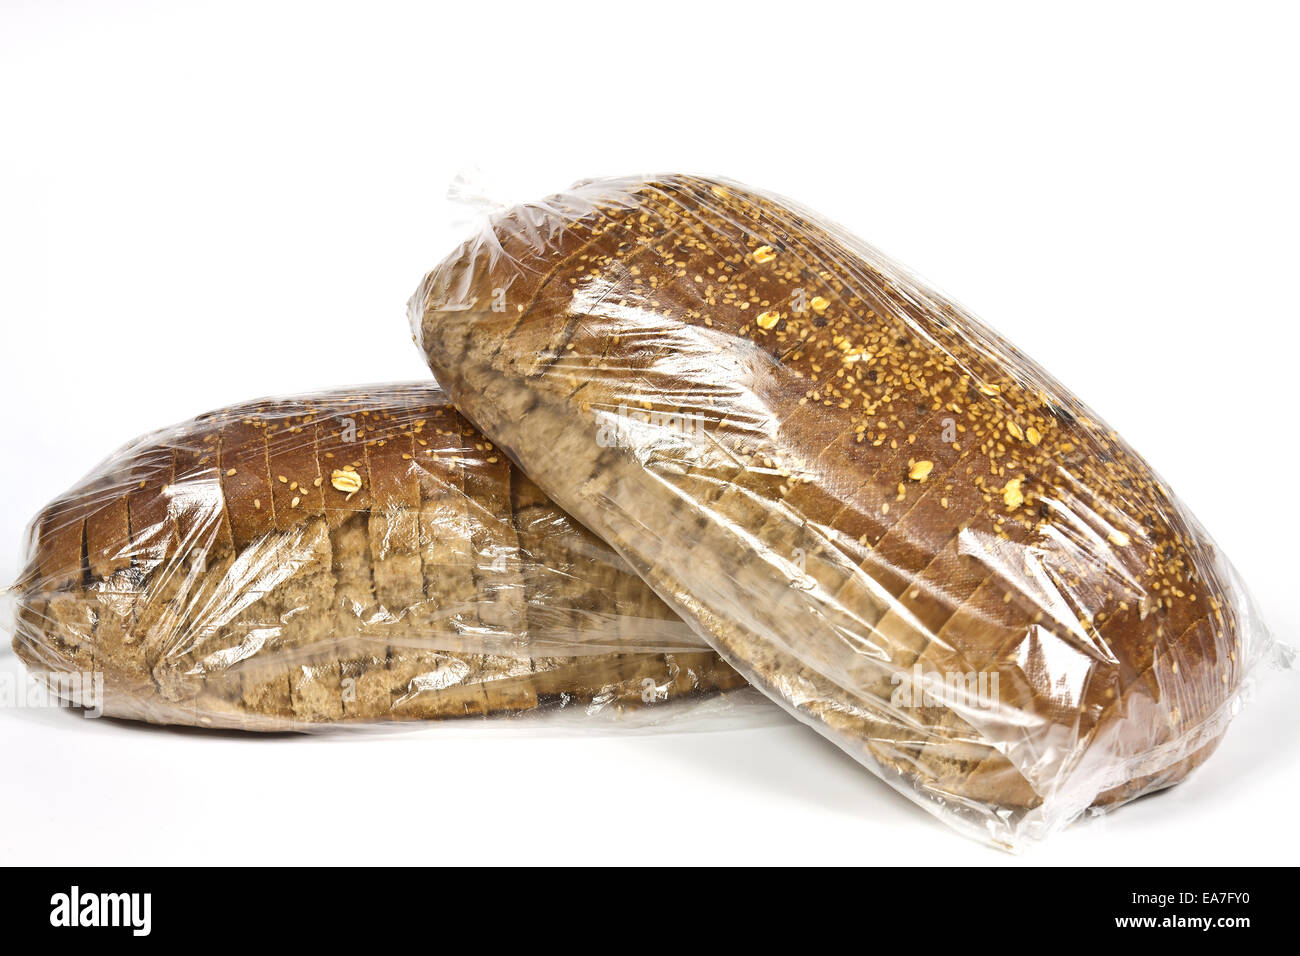 Packed in plastic bag hand-made rye bread diet Stock Photo